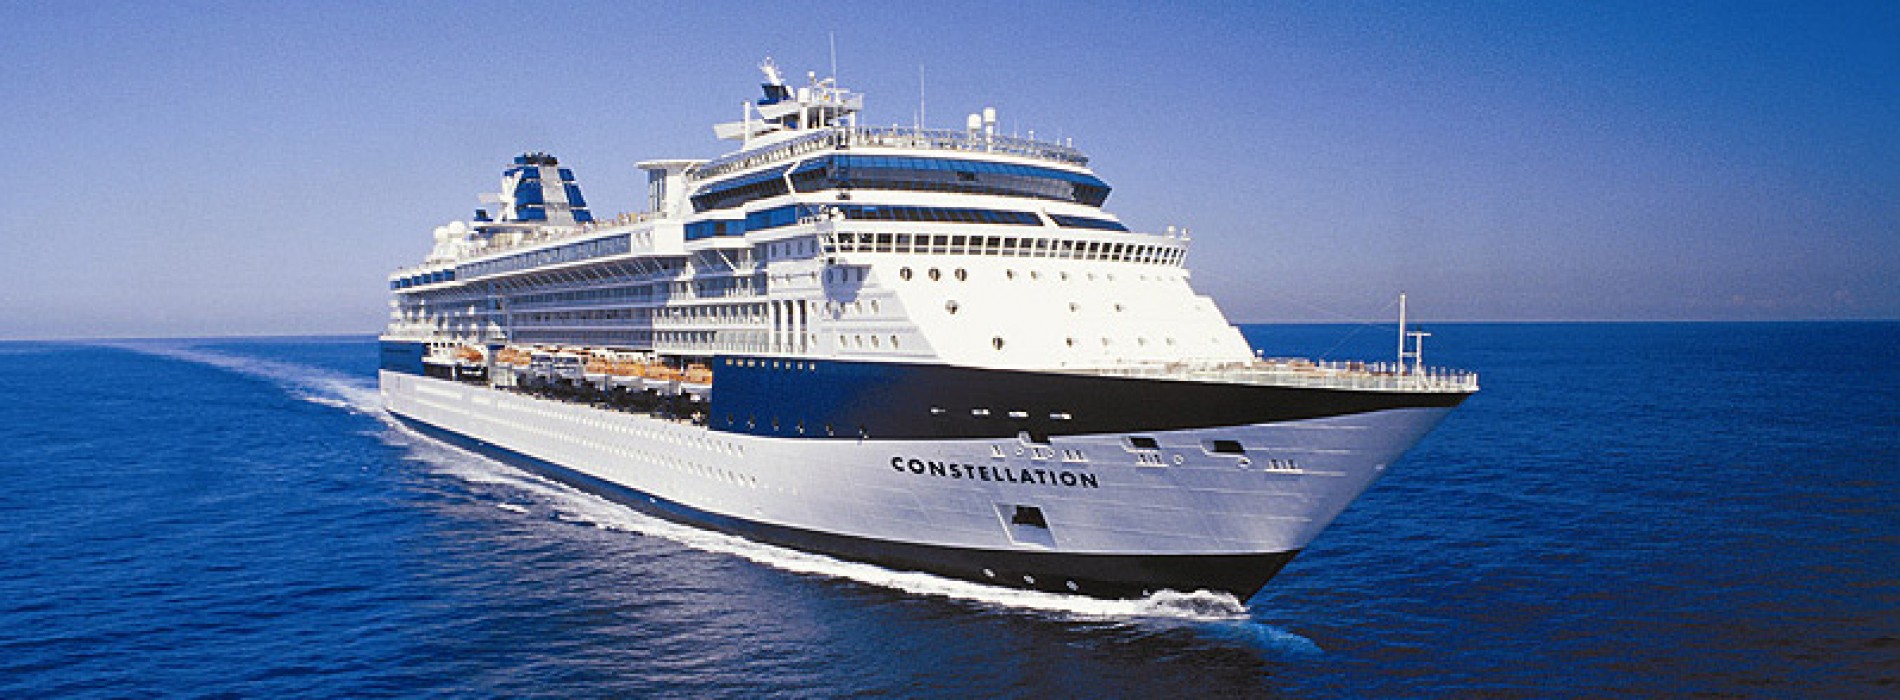 TIRUN announces exclusive Indian cruises in December aboard Celebrity Constellation